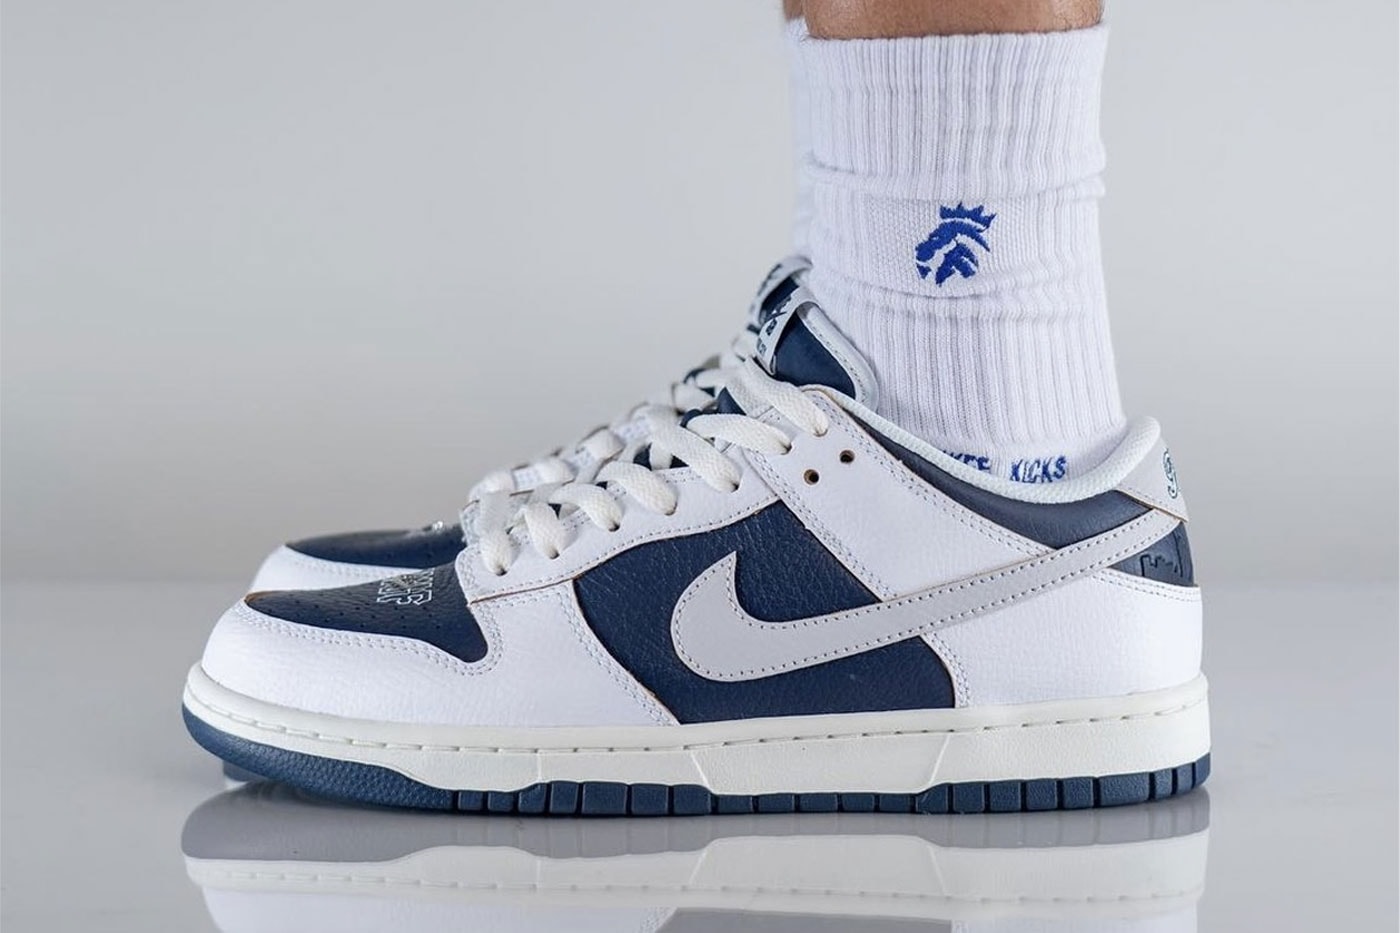 On-Feet Photos of HUF x Nike SB Dunk Low “City Pack”